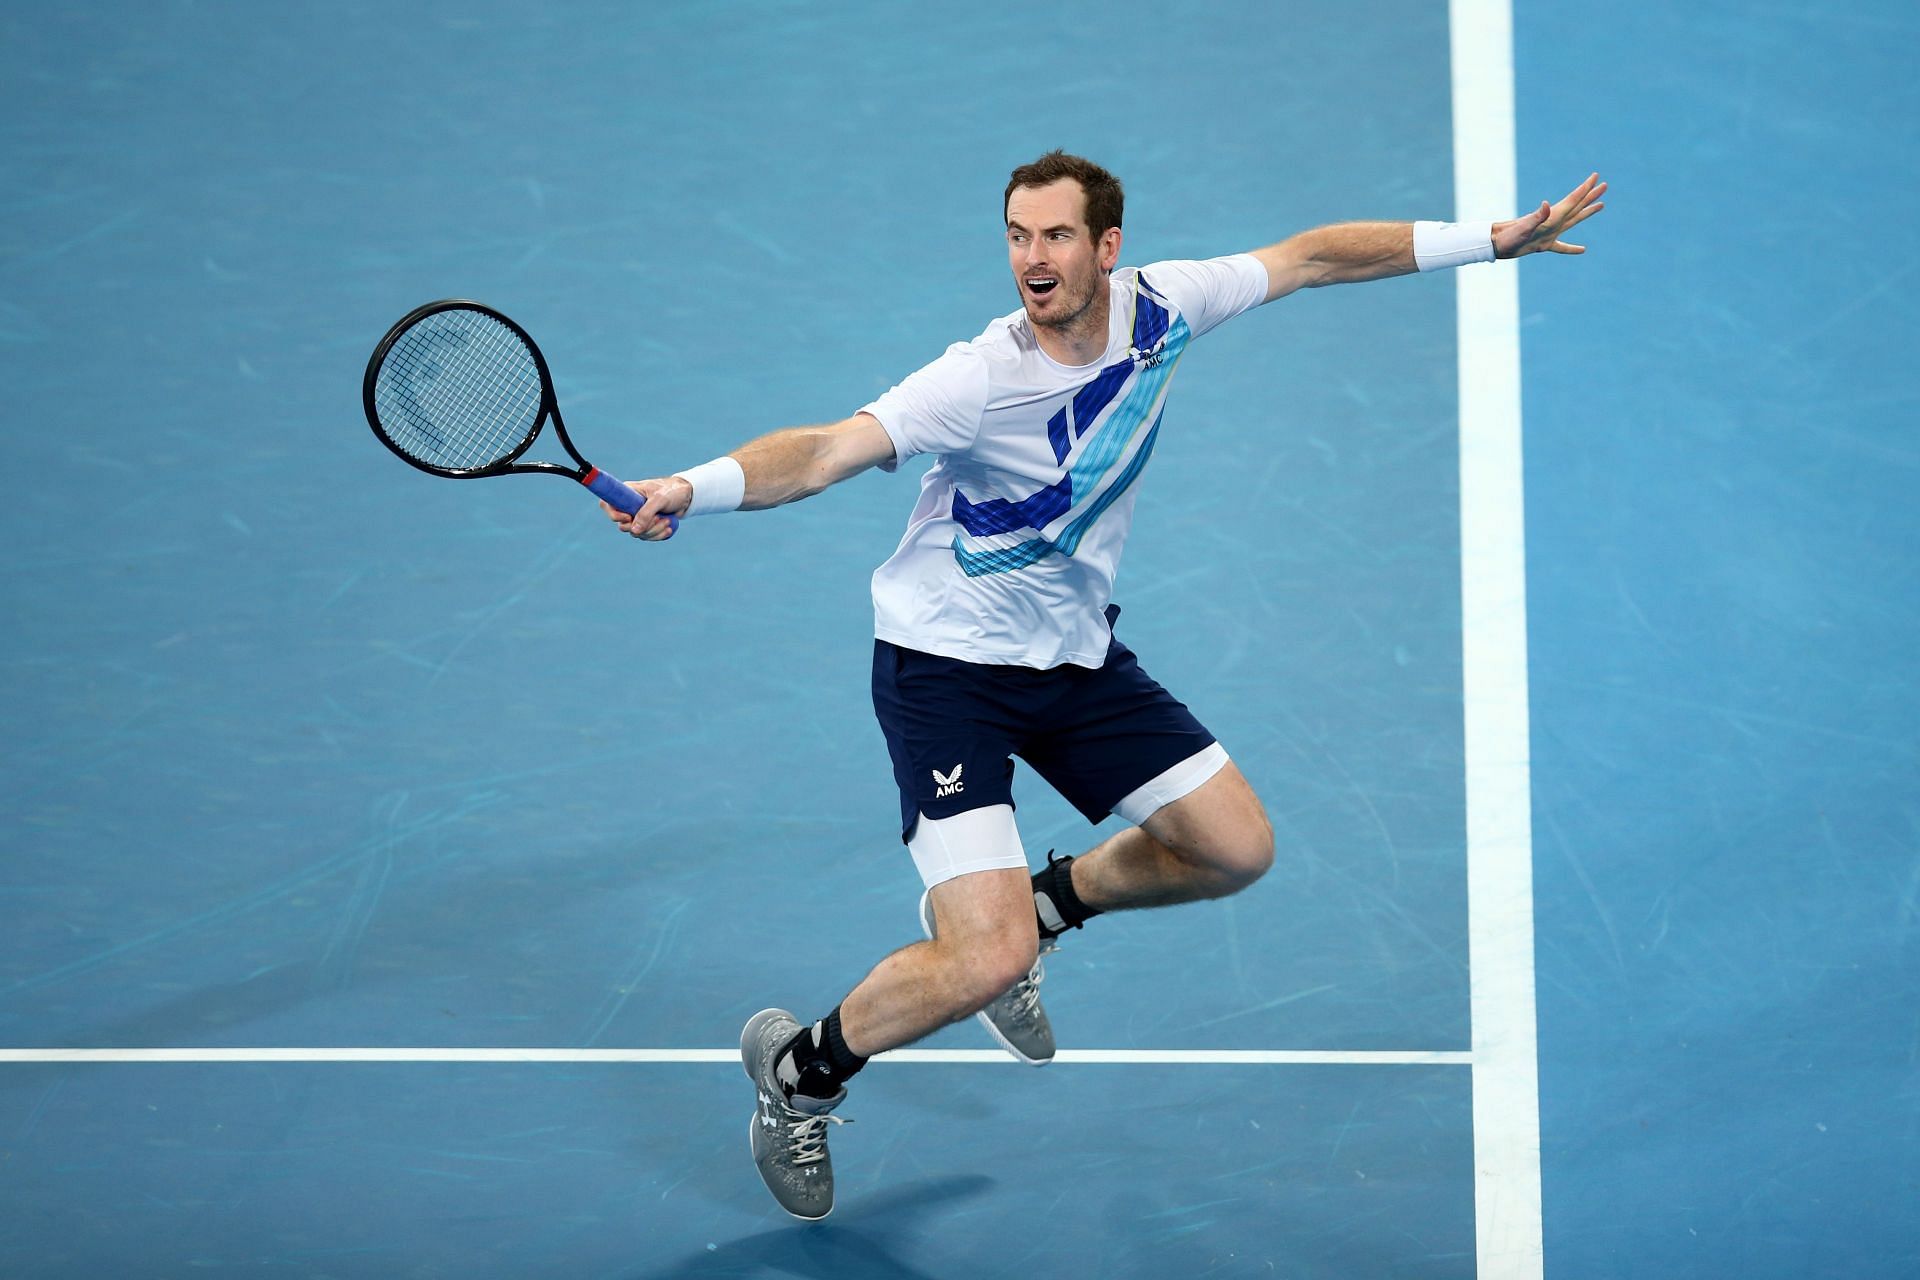 Andy Murray came back from a set down to beat Relly Opelka